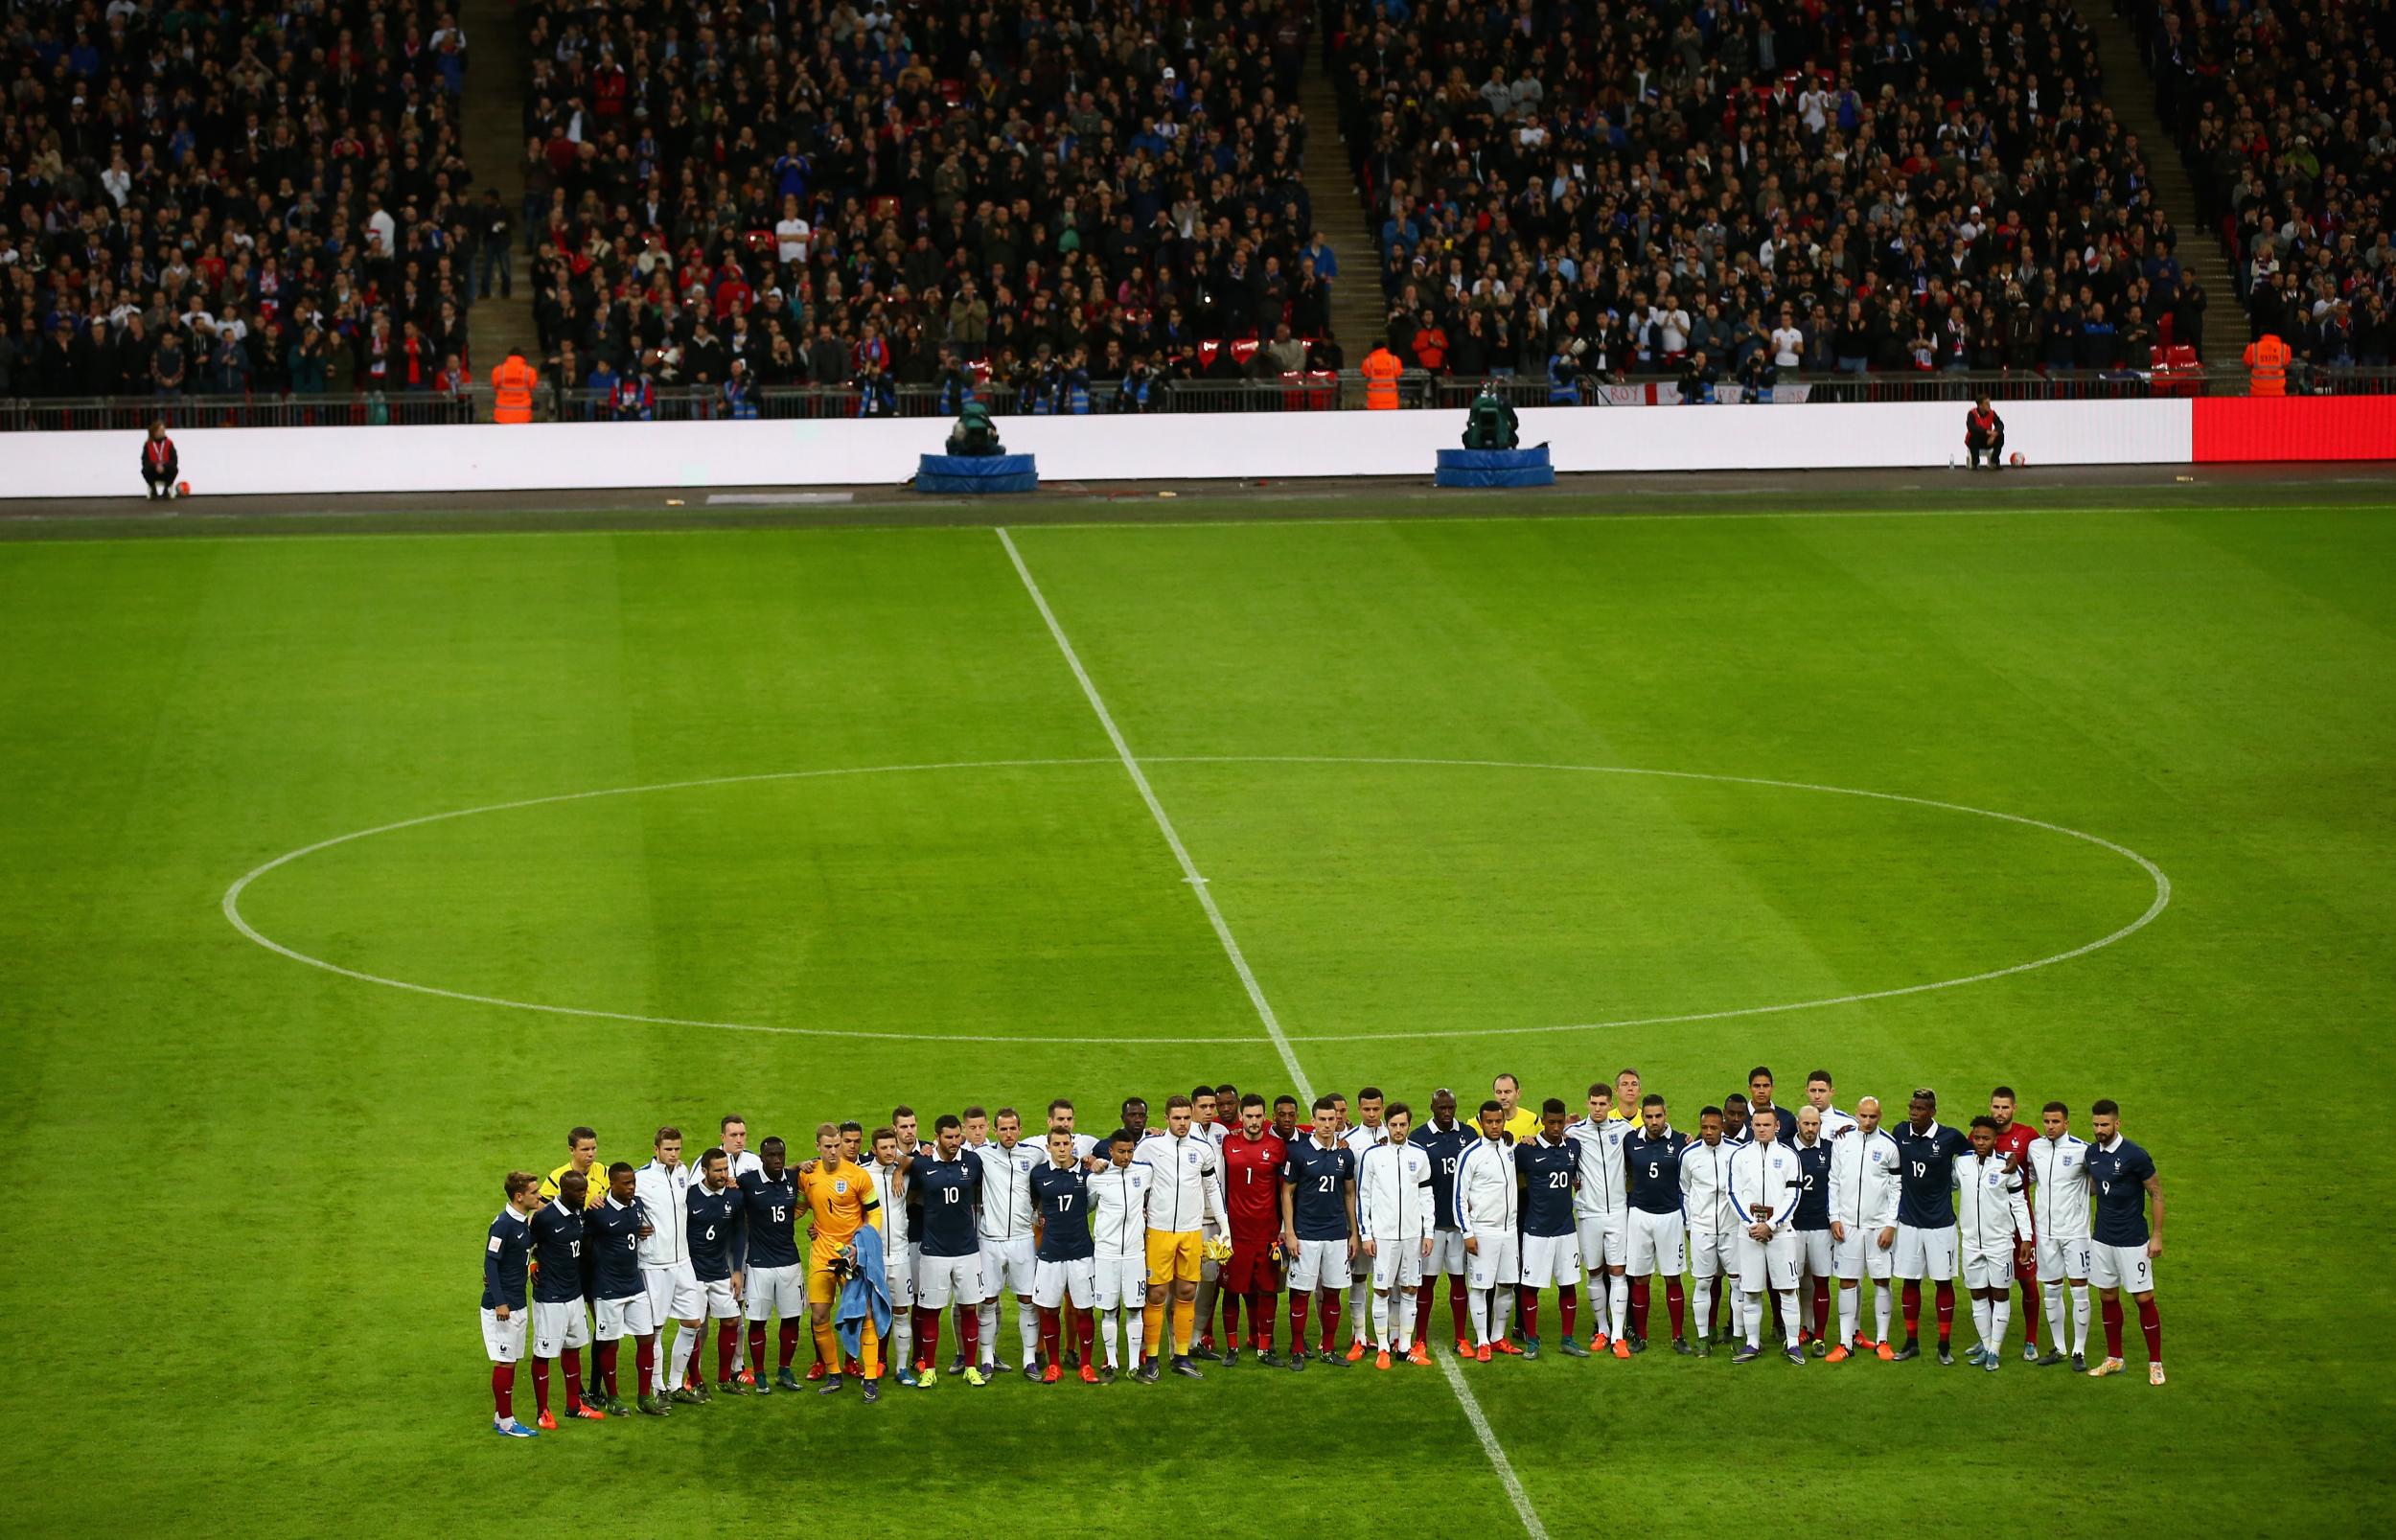 England and France international players line up side-by-side before tonight's friendly.